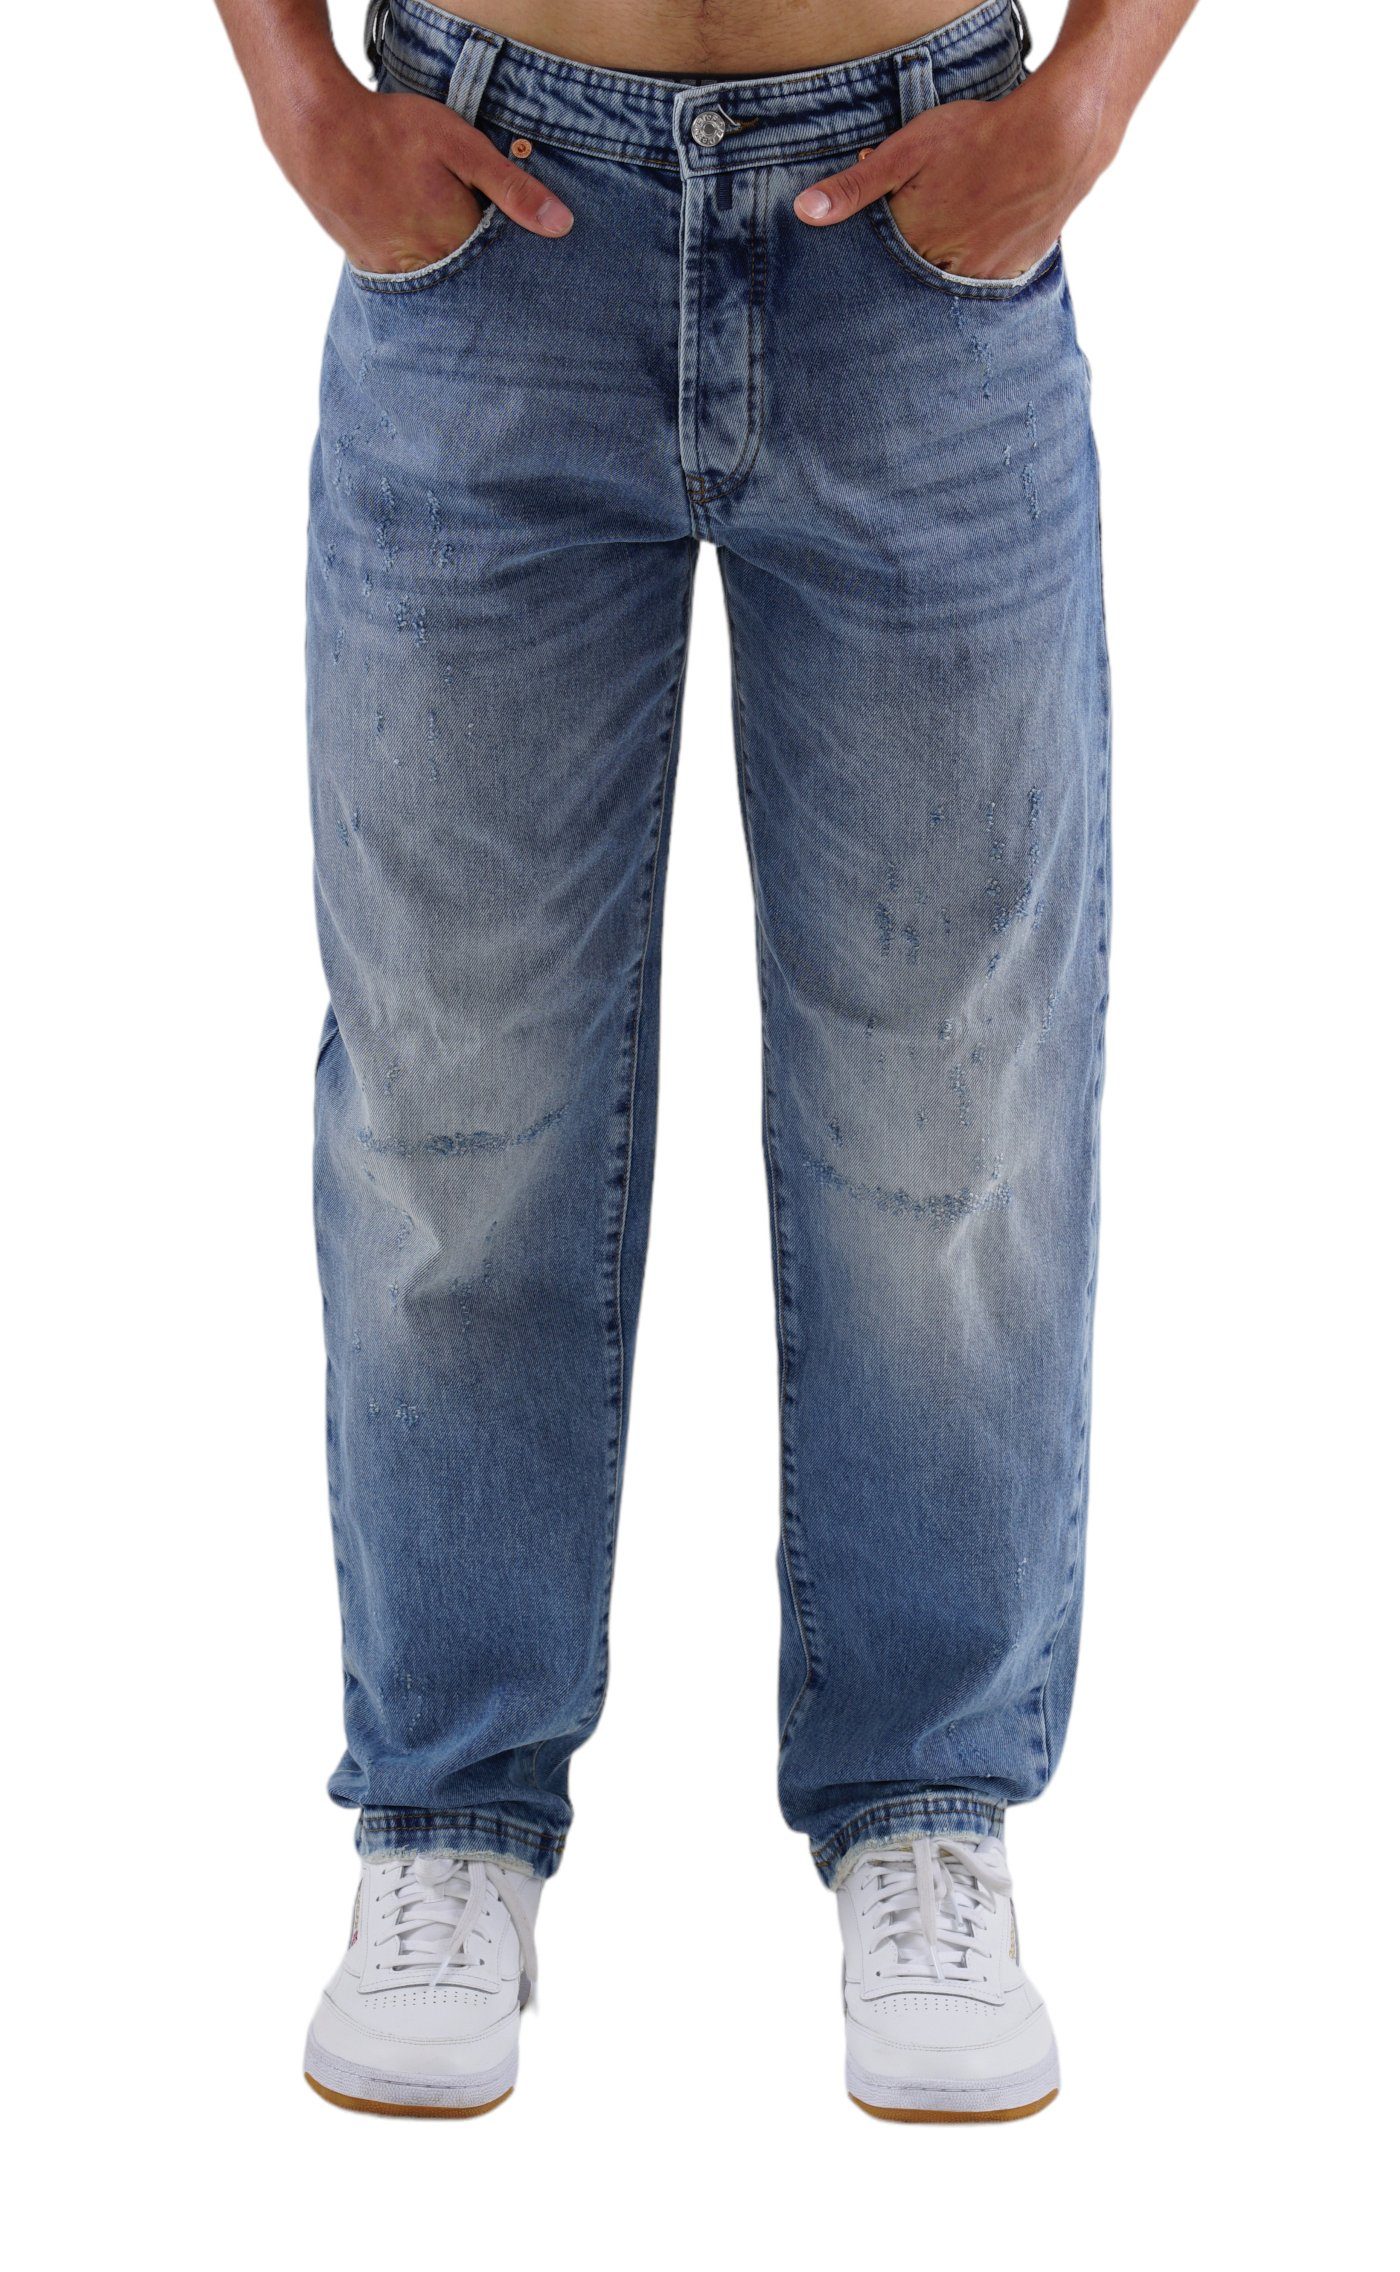 PICALDI Jeans Weite Jeans Fit, Zicco 472 Oakland Relaxed Loose Fit